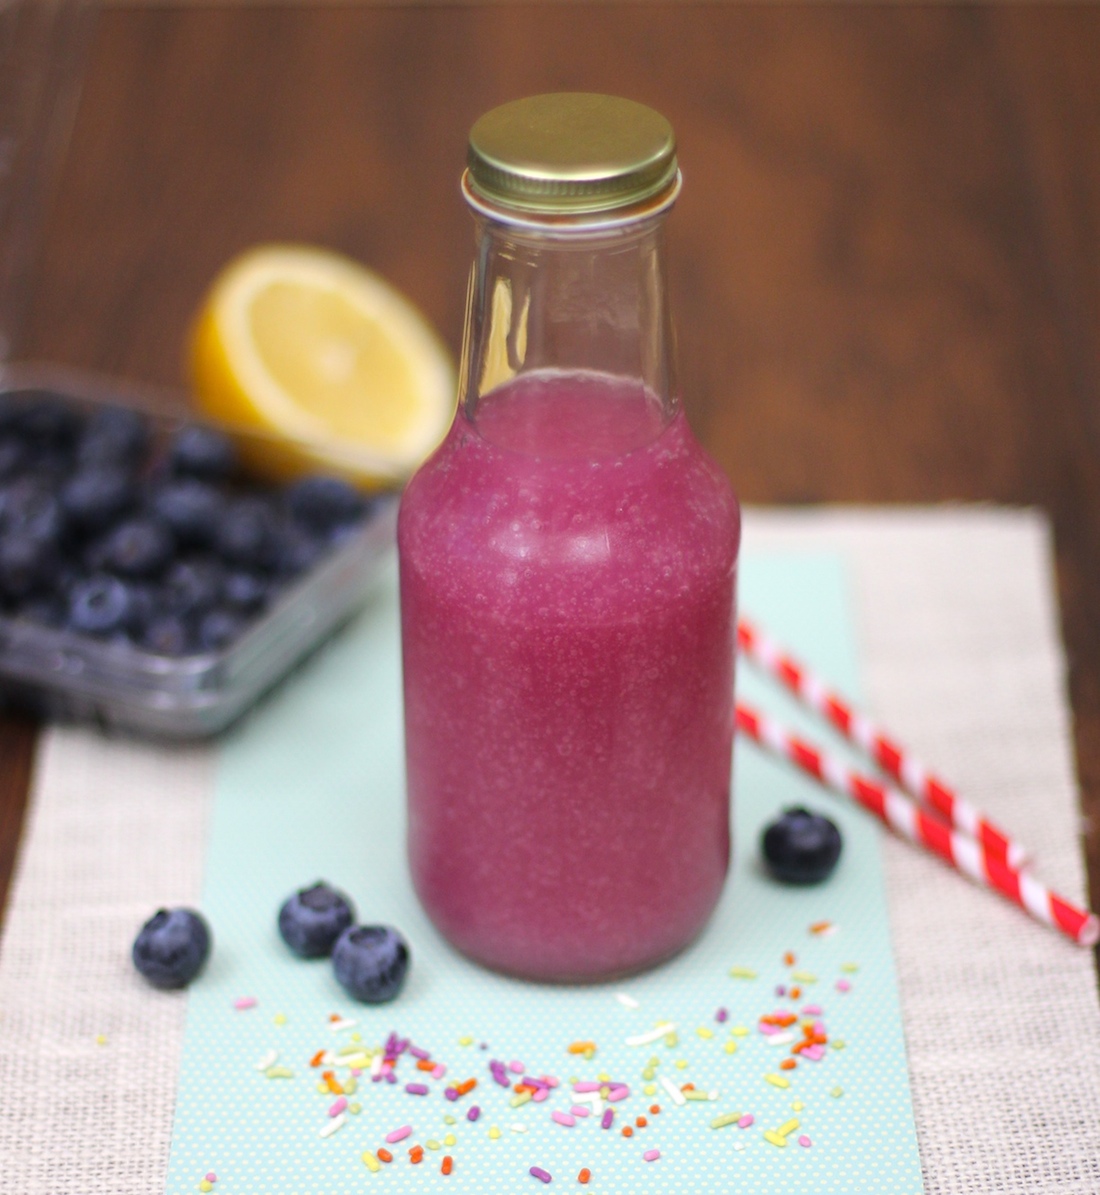 Healthy Homemade Sugar Free Blueberry Syrup Recipe (Only 5 Calories!)